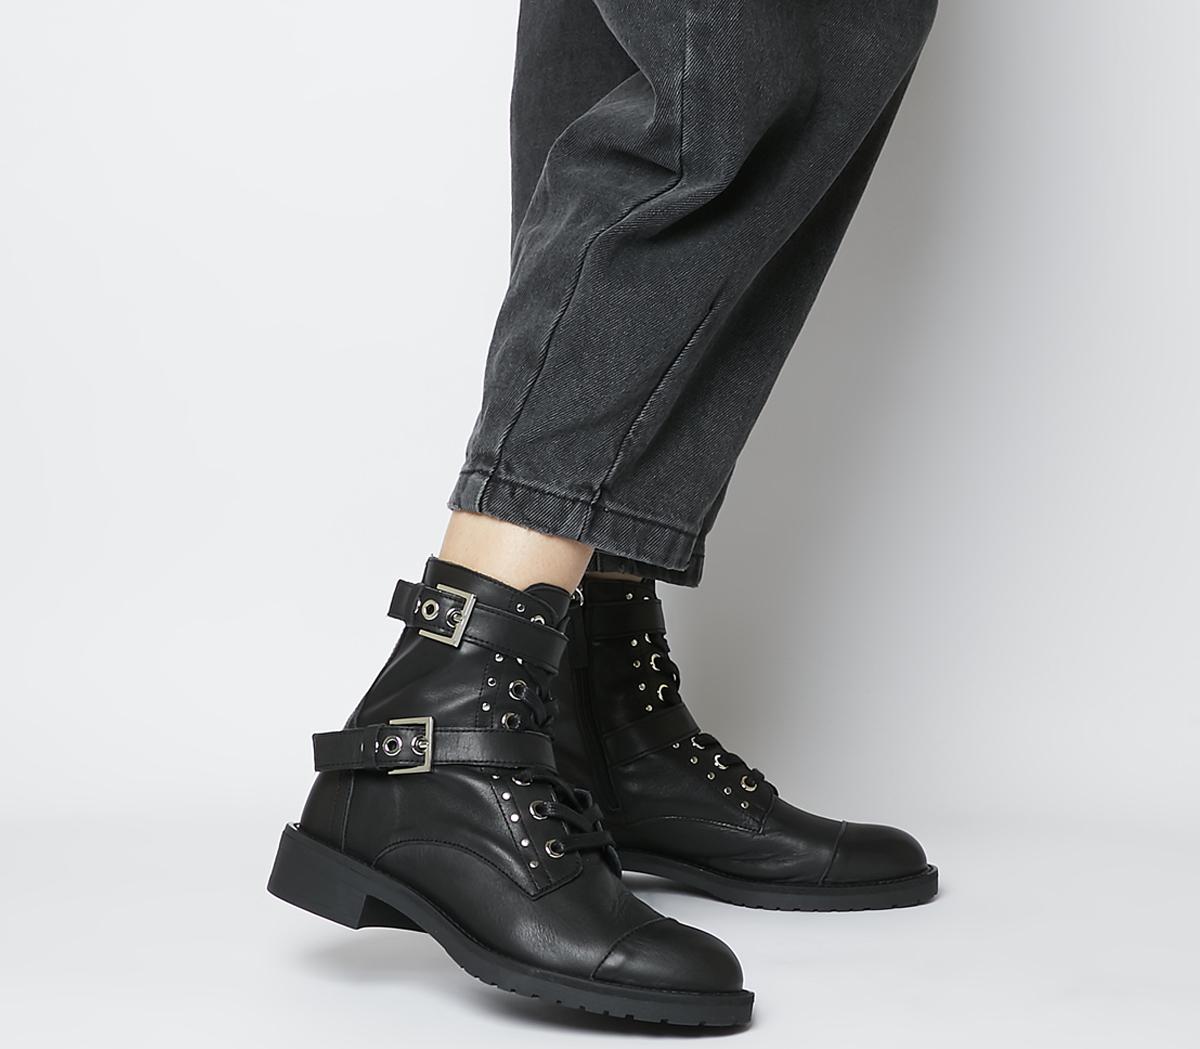 OFFICEAccomplice Lace Up Buckle BootsBlack Leather Silver Hardware